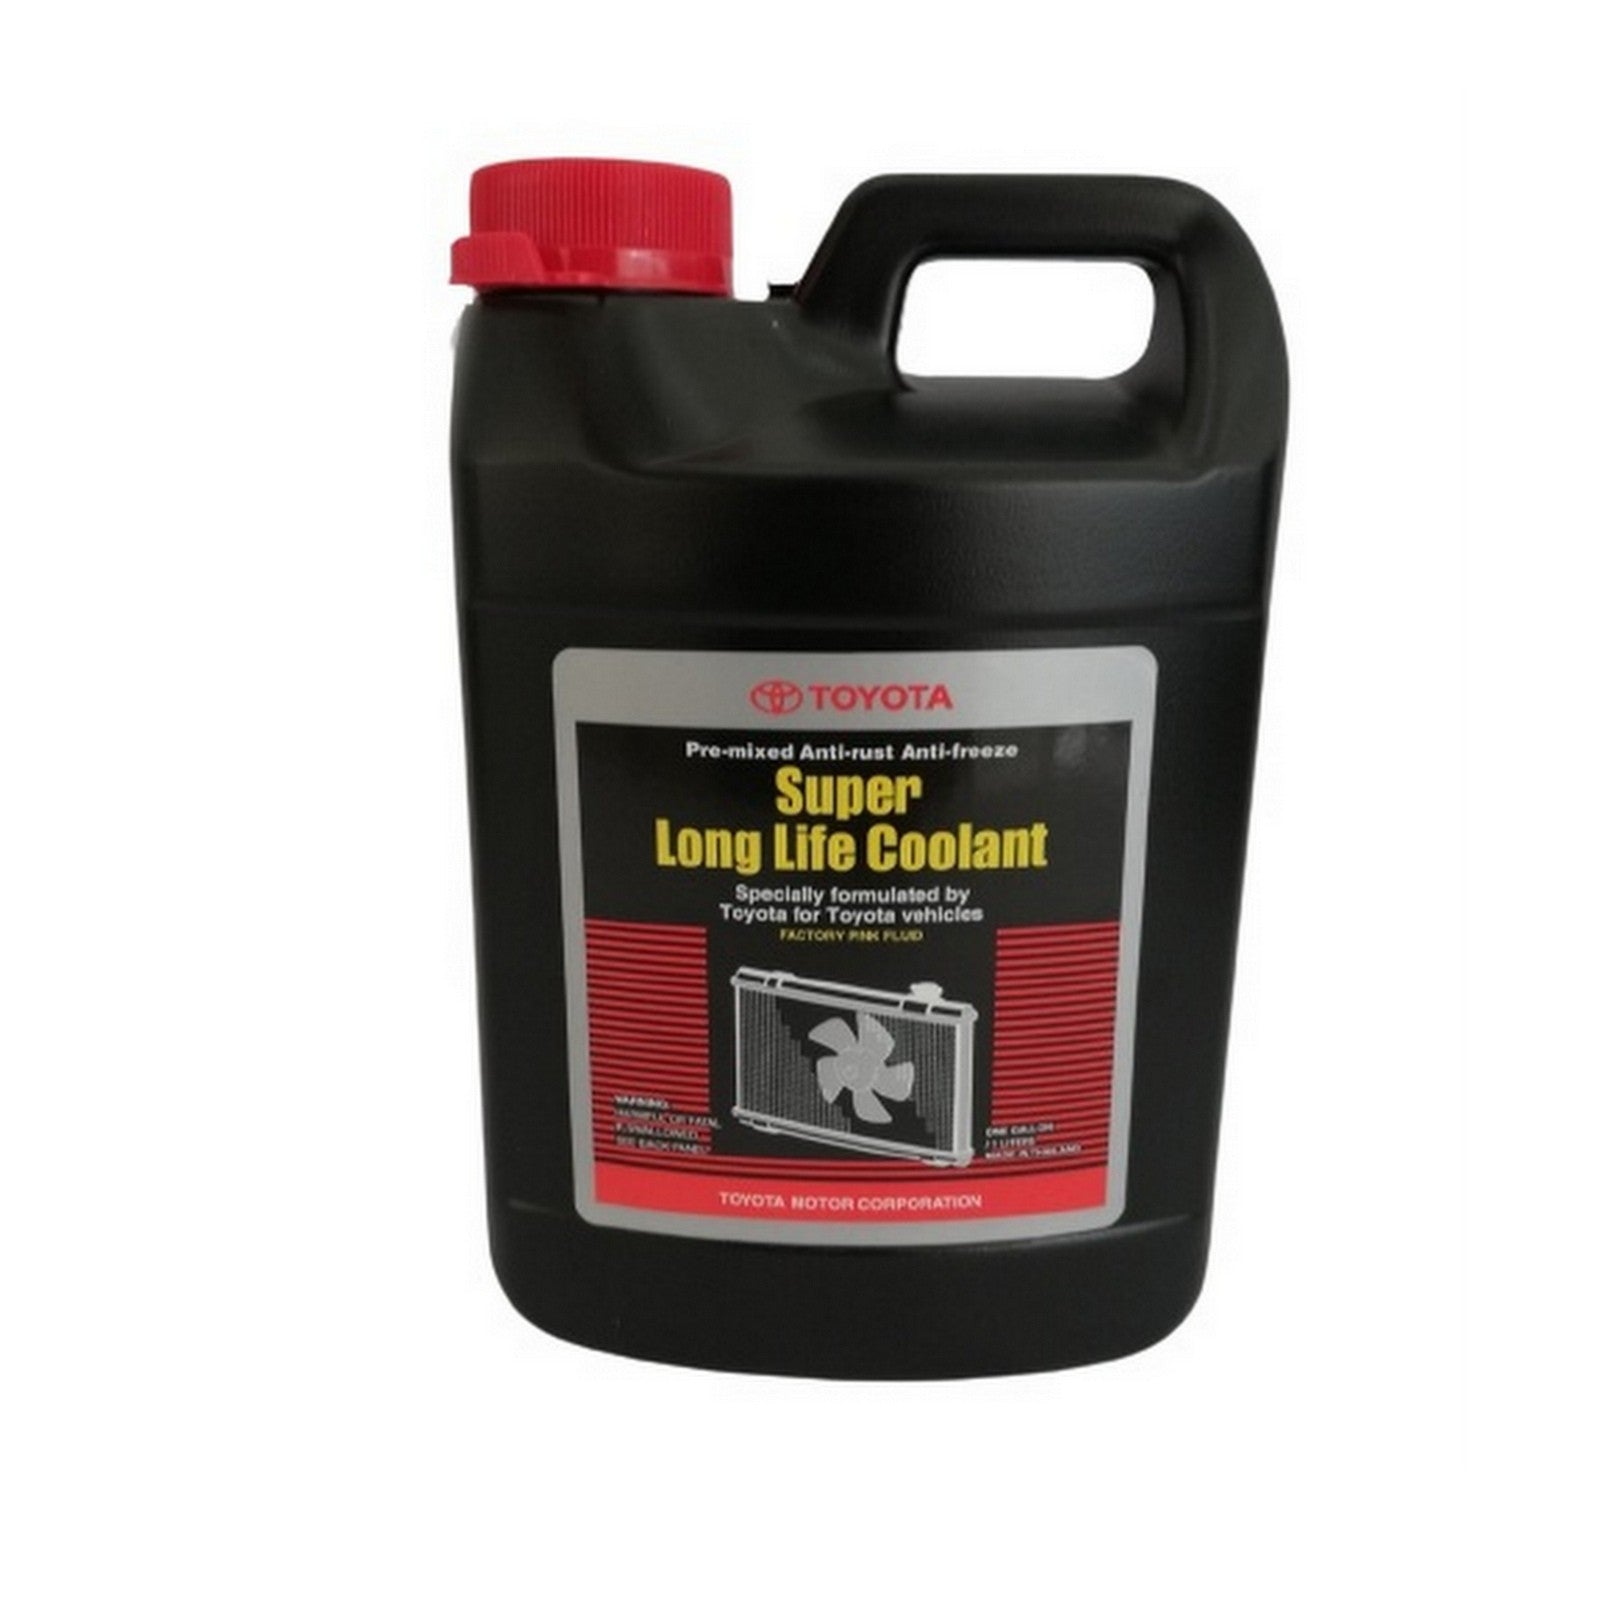 RADIATOR COOLANT SUPER LONG LIFE COOLANT - TOYOTA GENUINE (MADE IN THAILAND)